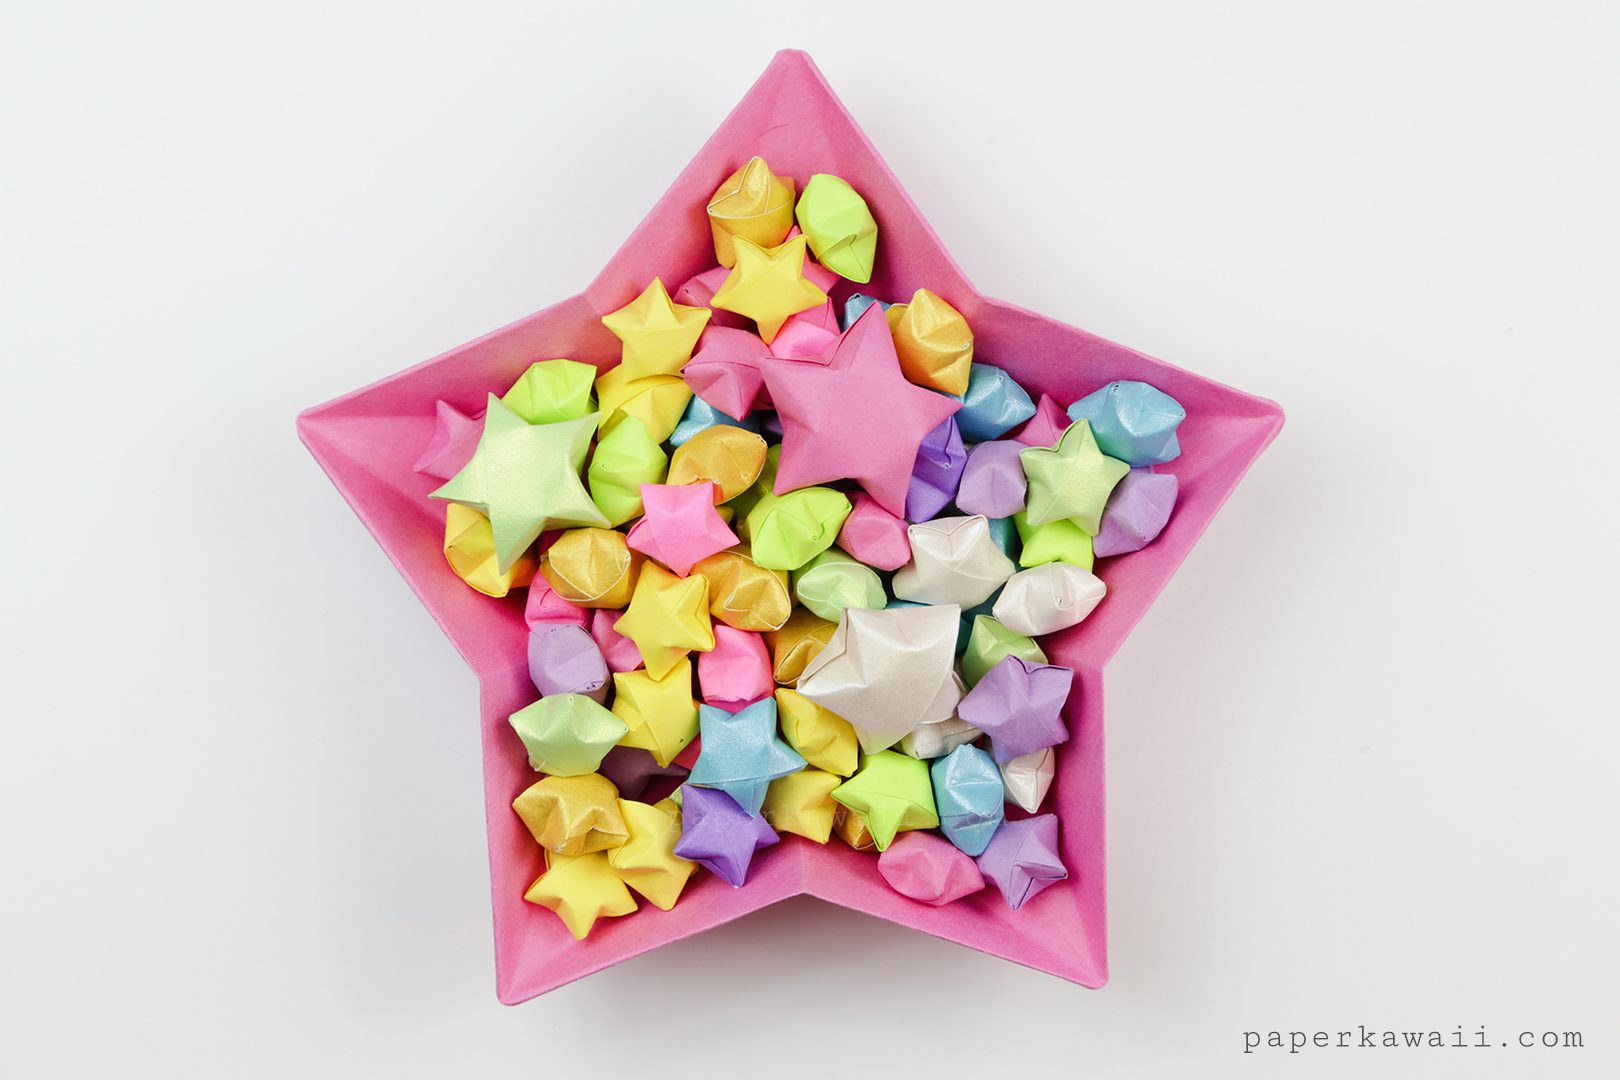 origami lucky star printable instructions - Google Search